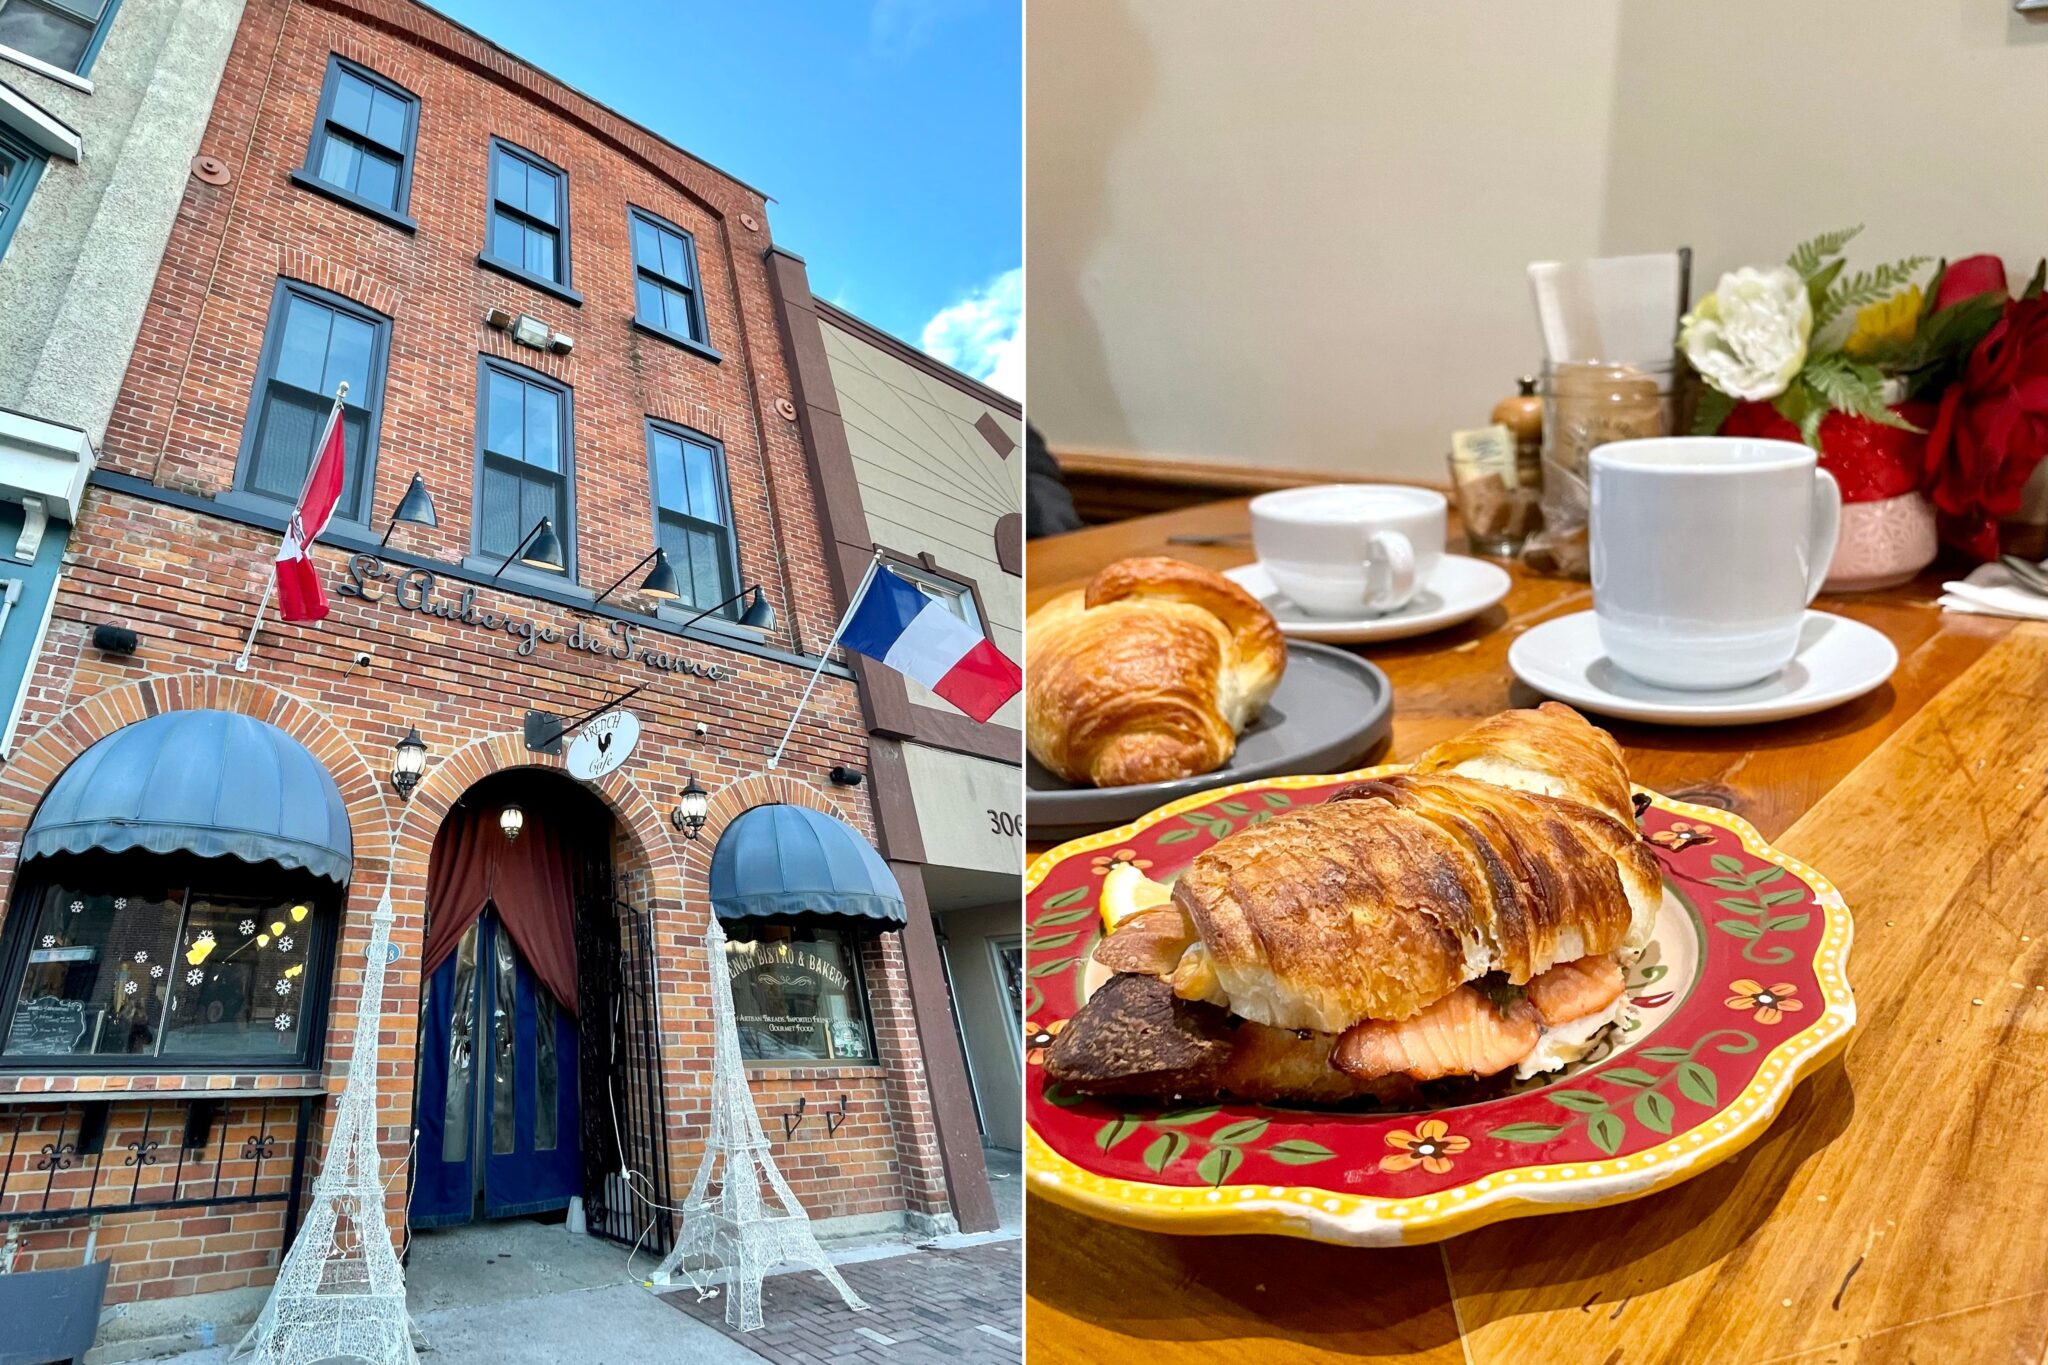 the exterior of a french bistro with blue awnings, the France flag and arched brickwork, next to a photo of a croissant sandwich